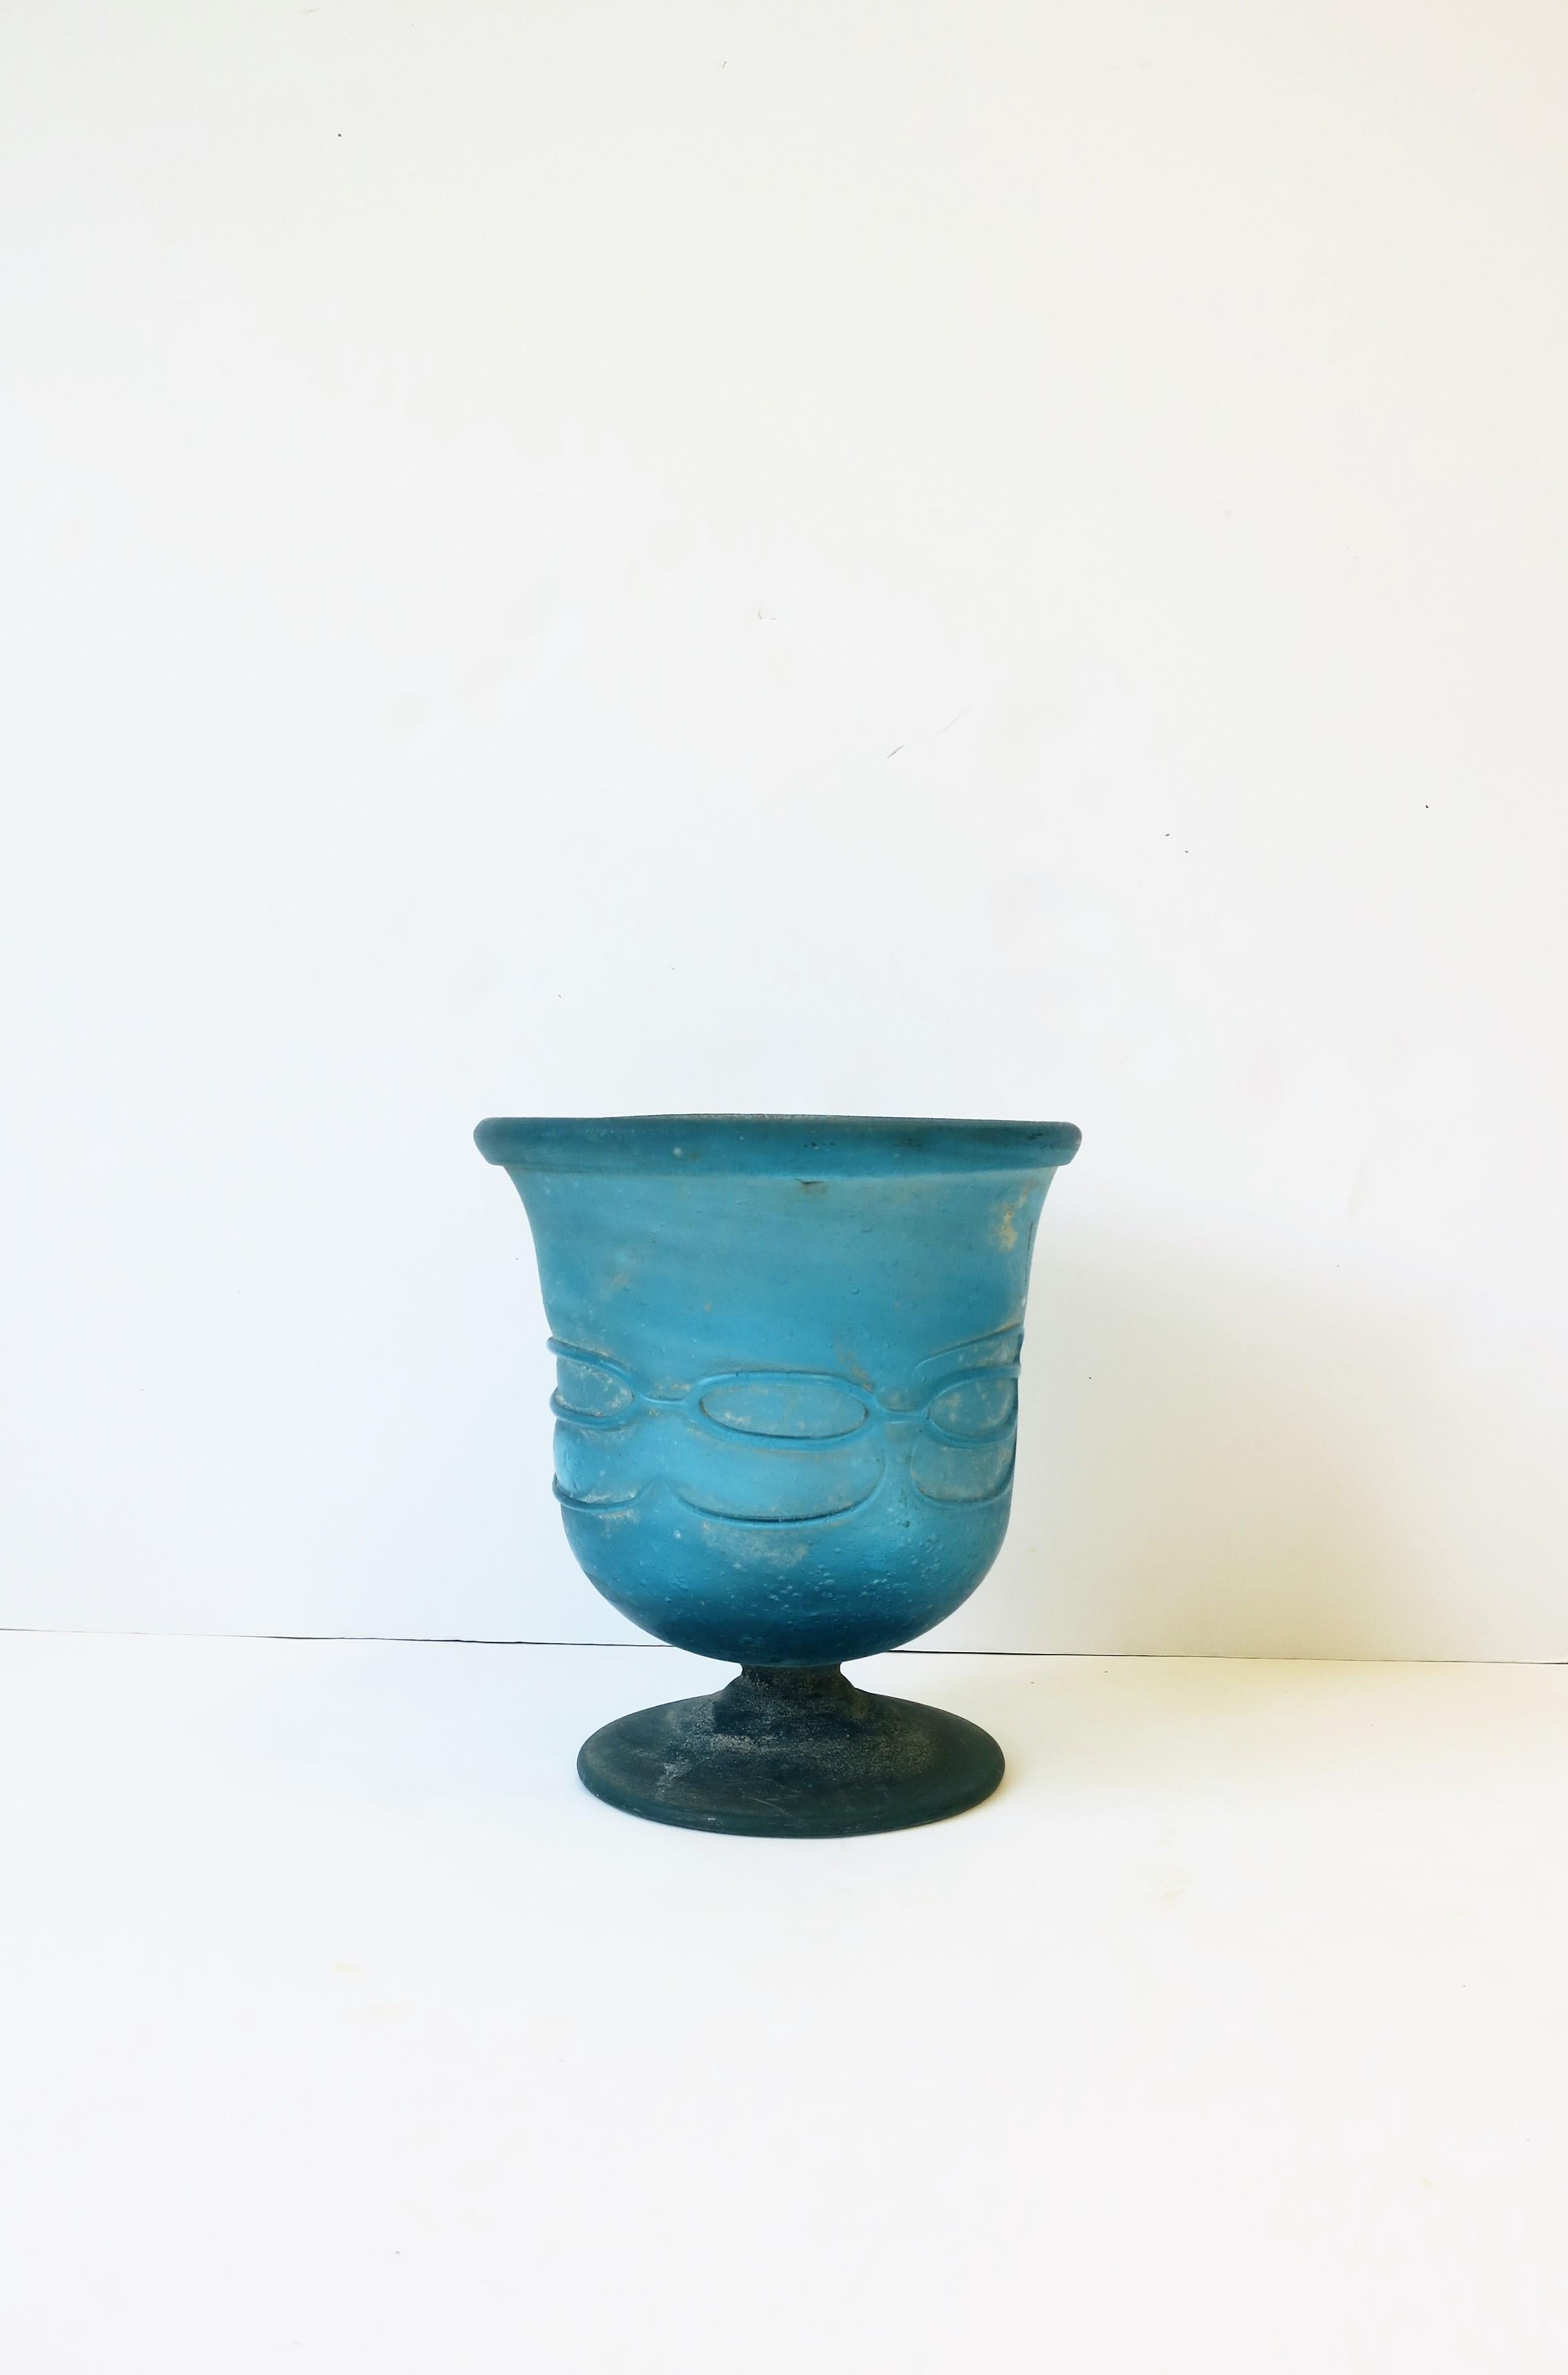 A beautiful Post-Modern Italian blue blown glass art glass urn vase with loop exterior design, controlled bubble interior and a 'scavo' rustic matte weathered finish/surface, circa late-20th century, Italy. In the style of Seguso. Beautiful as a